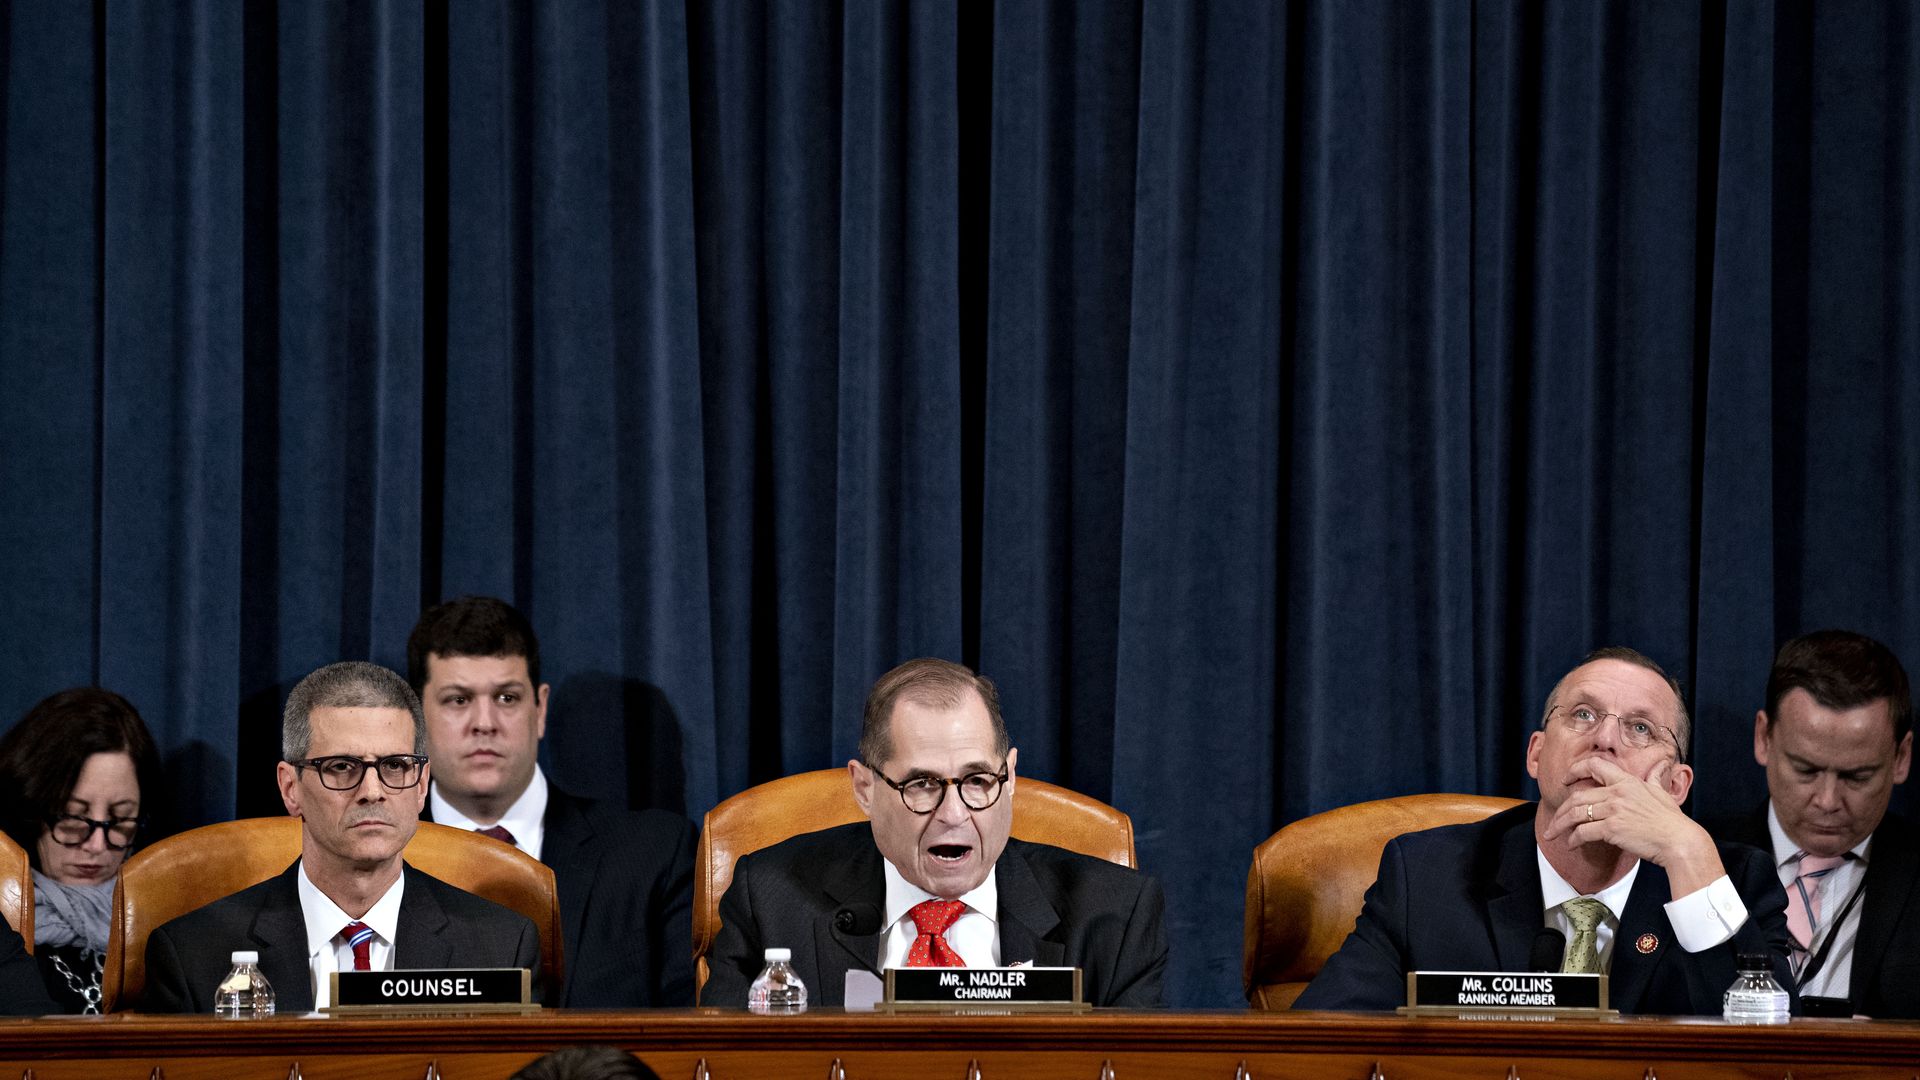 U.S. House Judiciary Committee Chairman Jerry Nadler (D-NY) (C) speaks as ranking member Rep. Doug Collins (R-GA) (R) listens 